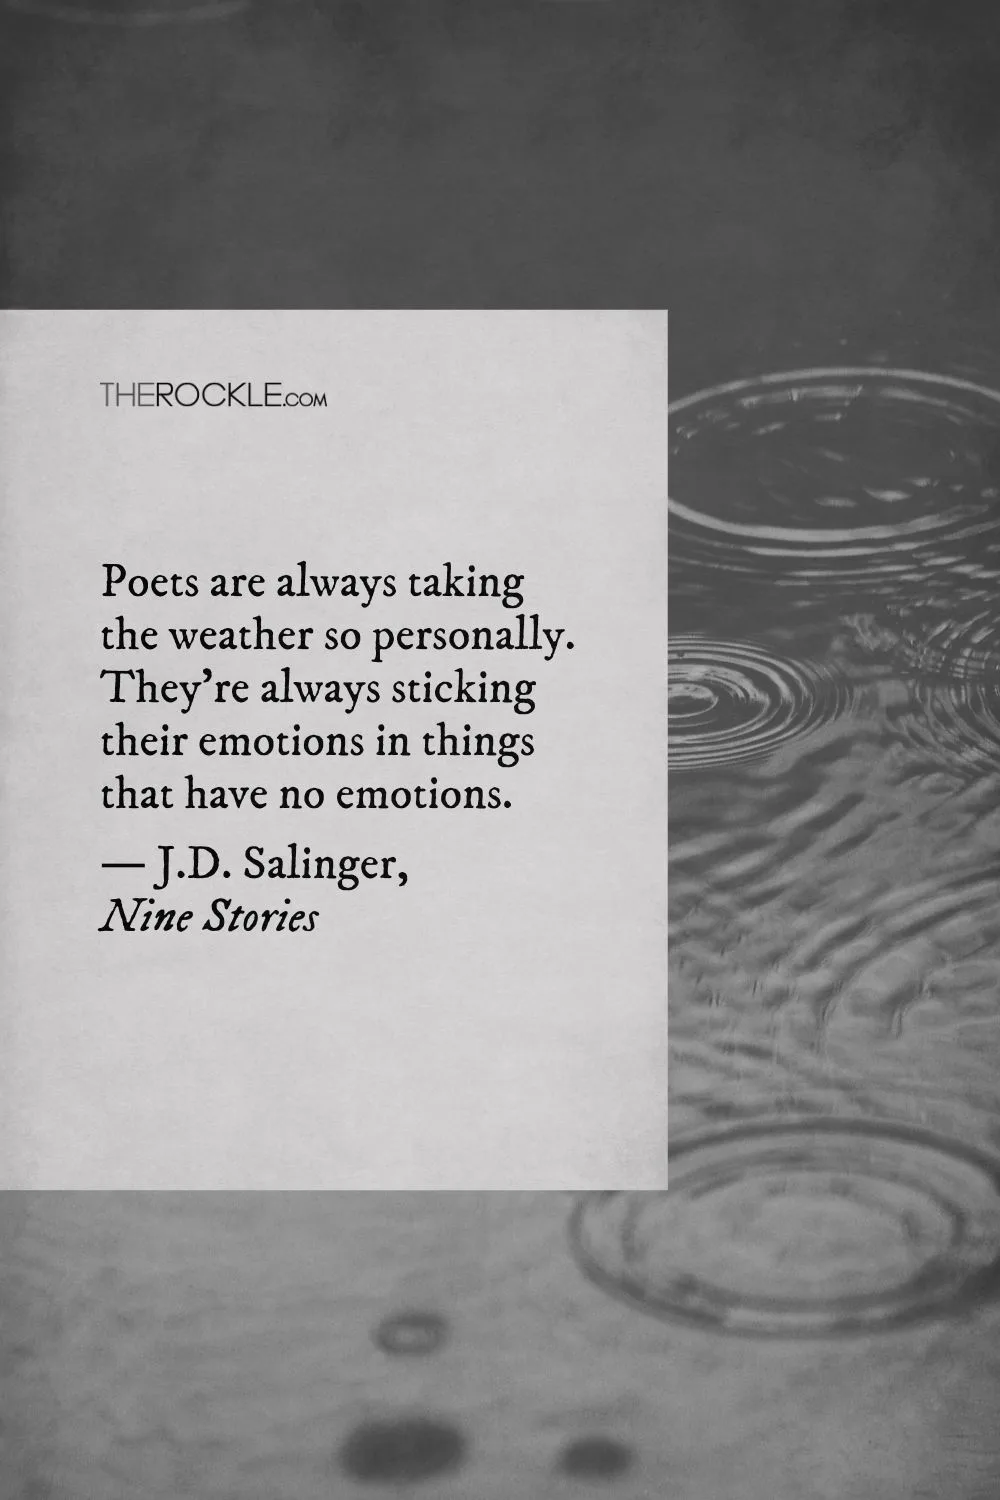 Salinger's quote about poets